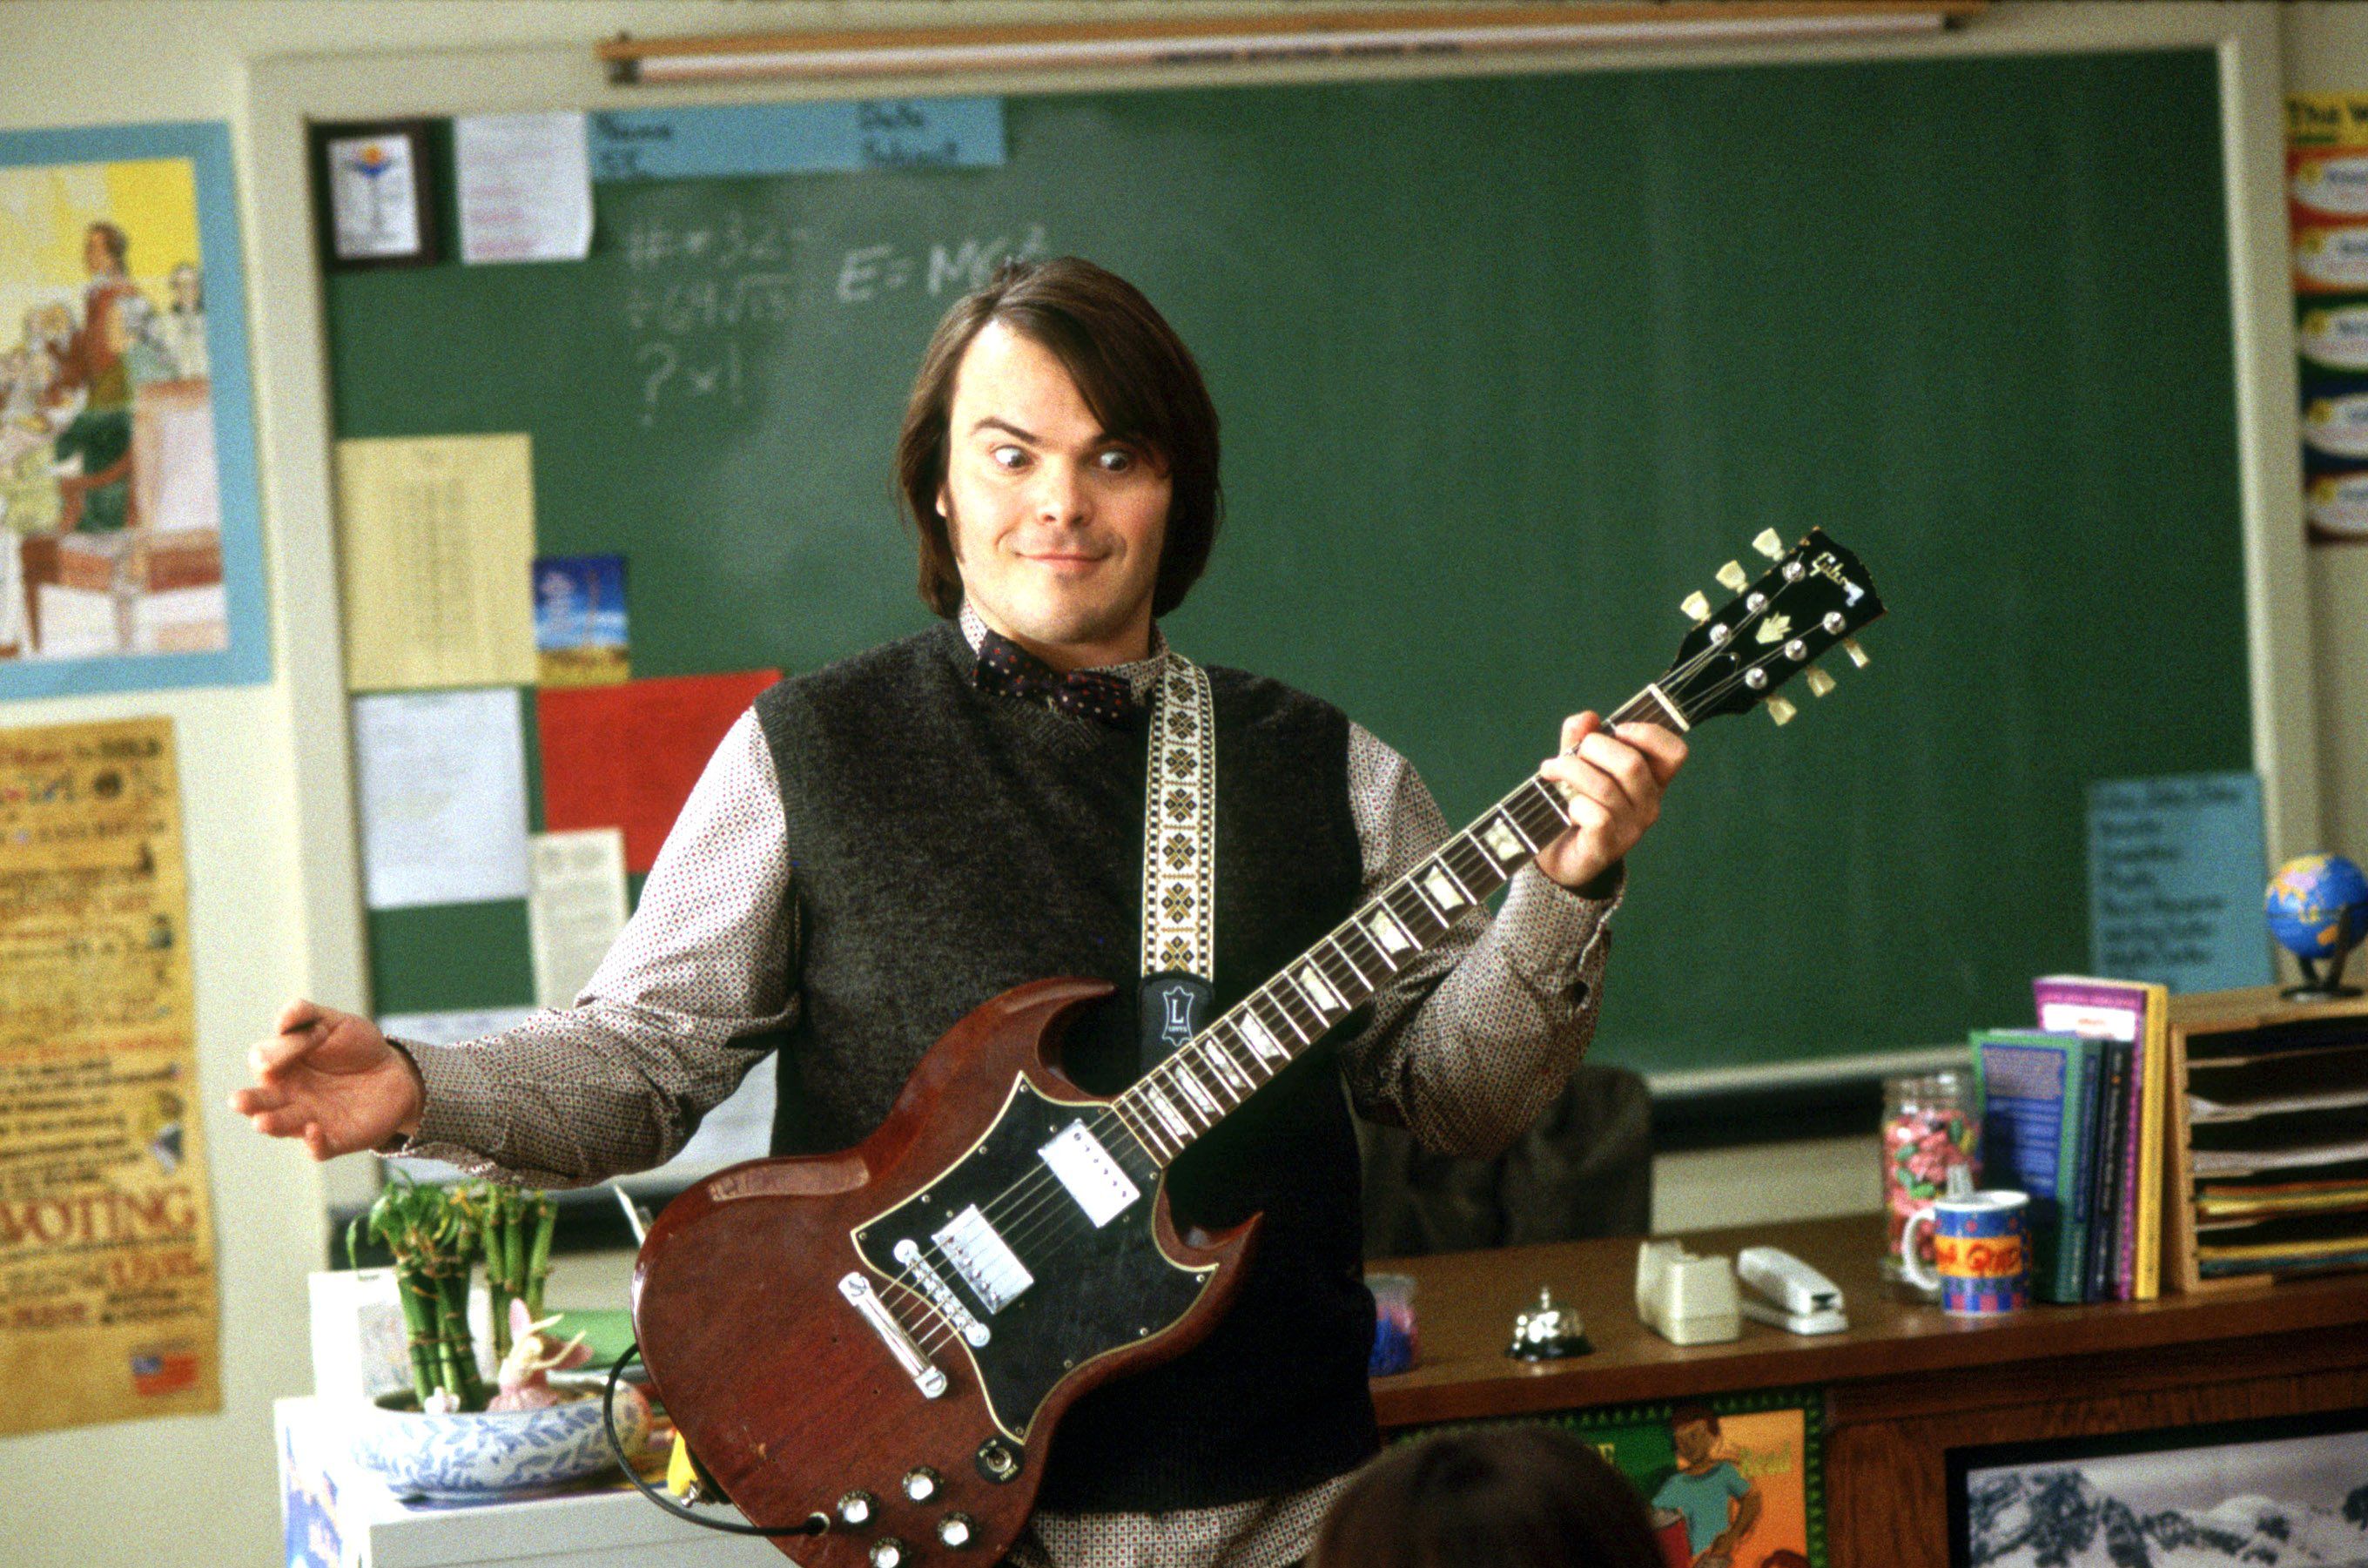 School of Rock Soundtrack - Every Song in the 2003 Movie